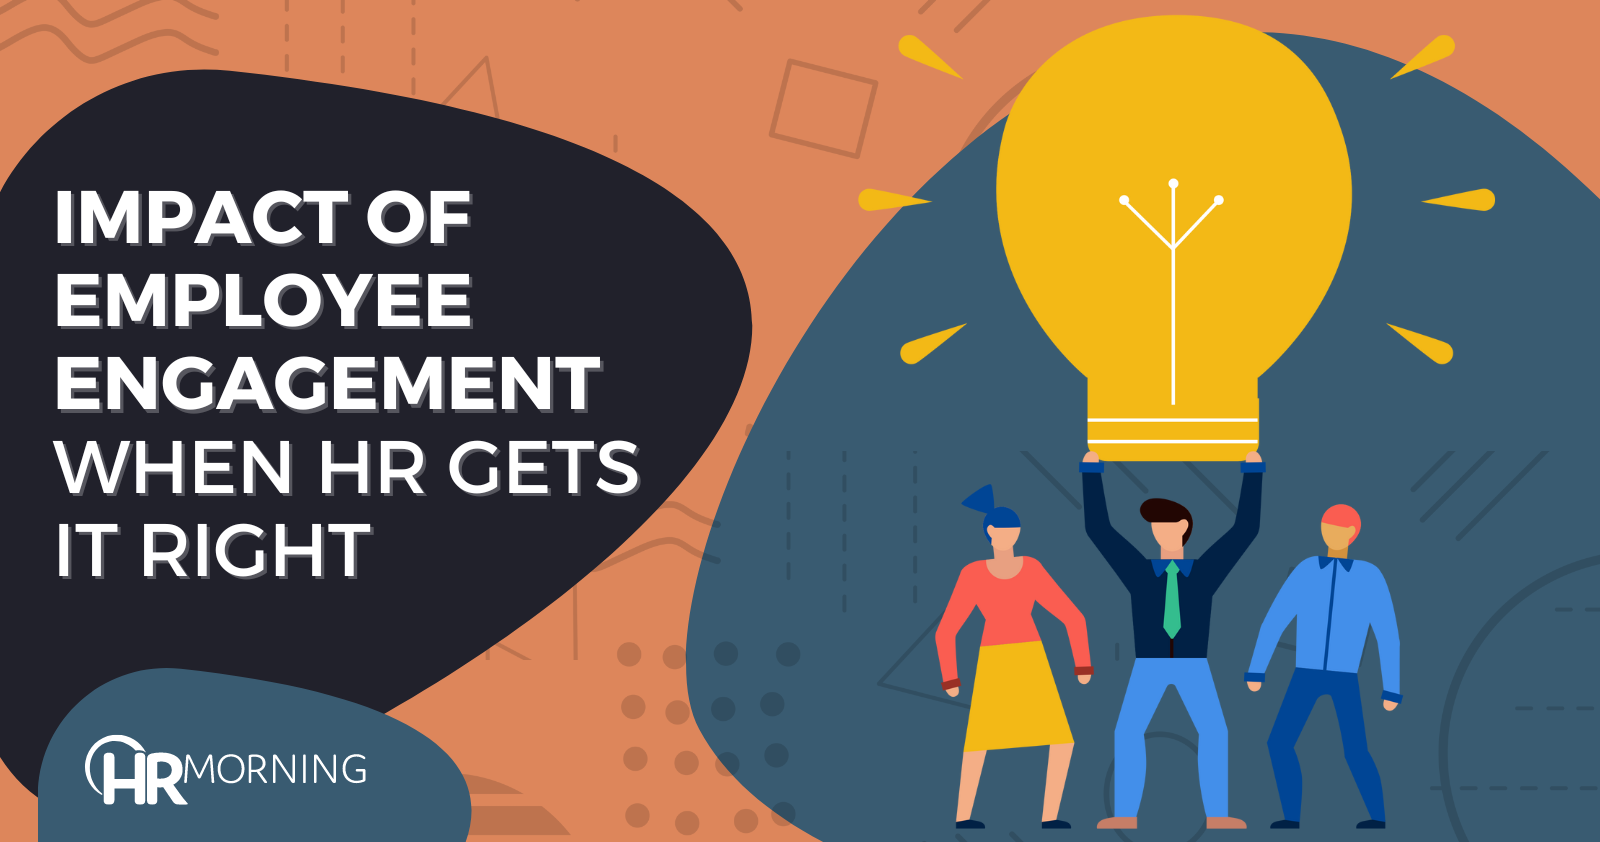 Impact of employee engagement when HR gets it right